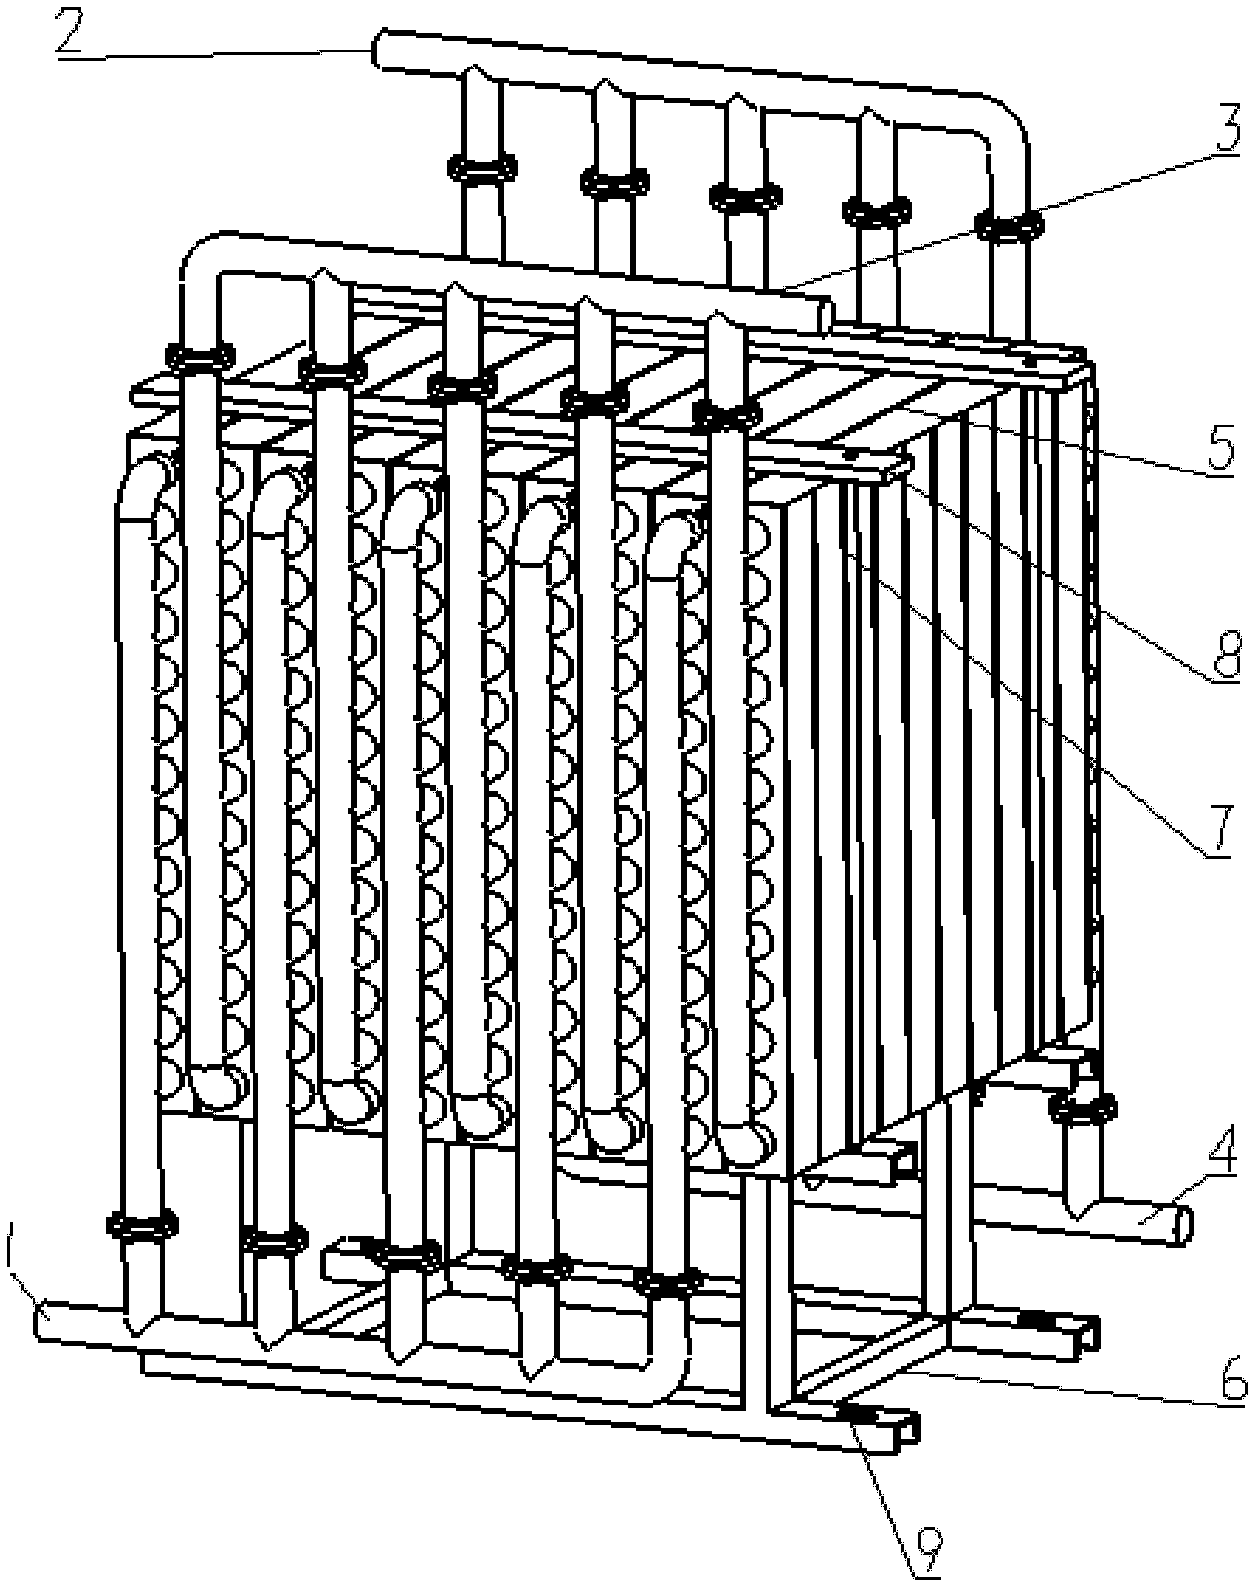 Thermoelectric generator using superconducting fluid for heat transfer